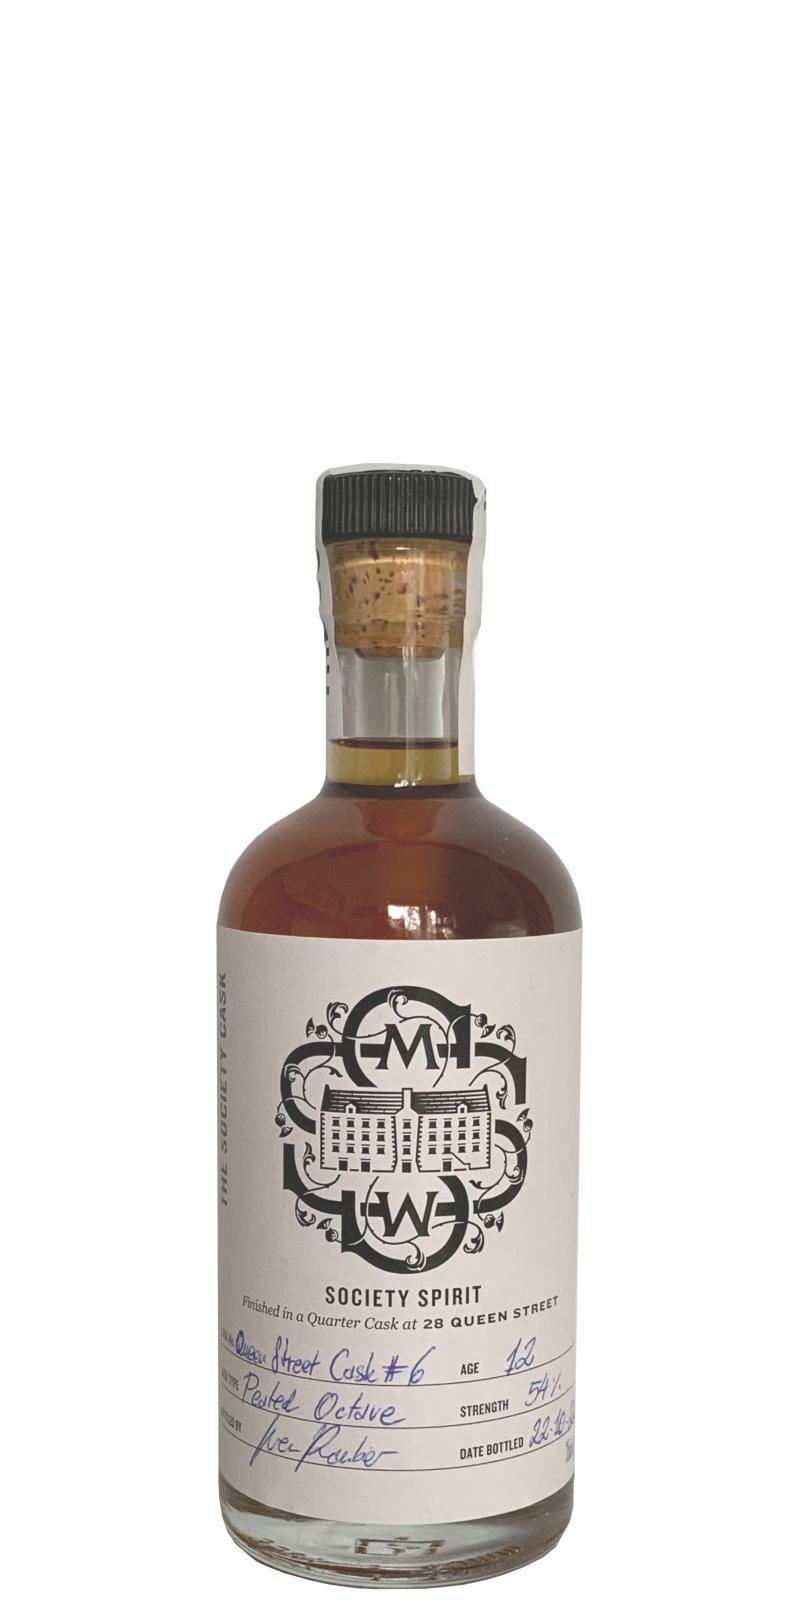 Society Spirit 12yo SMWS The Society Cask Peated Octave 28 Queen Street 54% 350ml